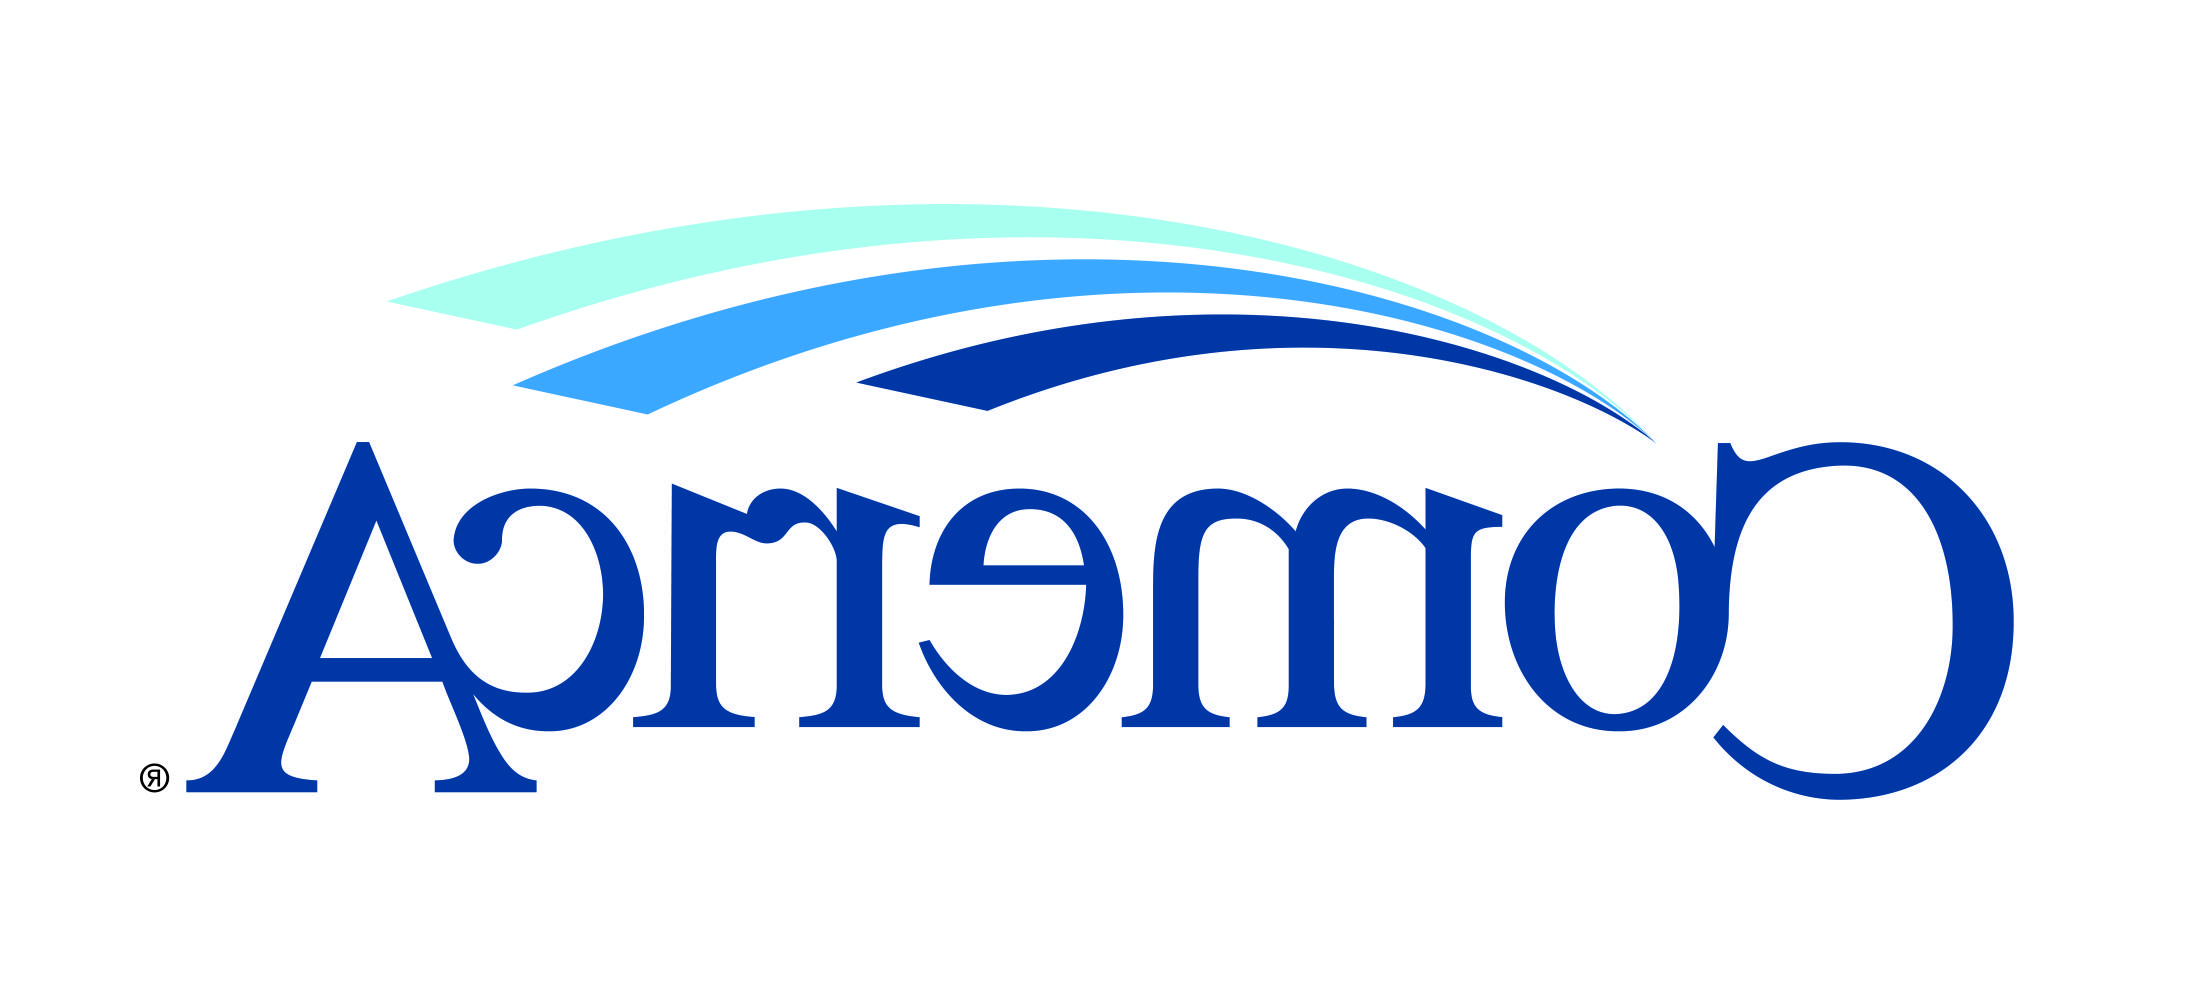 Comerica Bank logo: the word Comerica in flowing blue letters with a green highlight